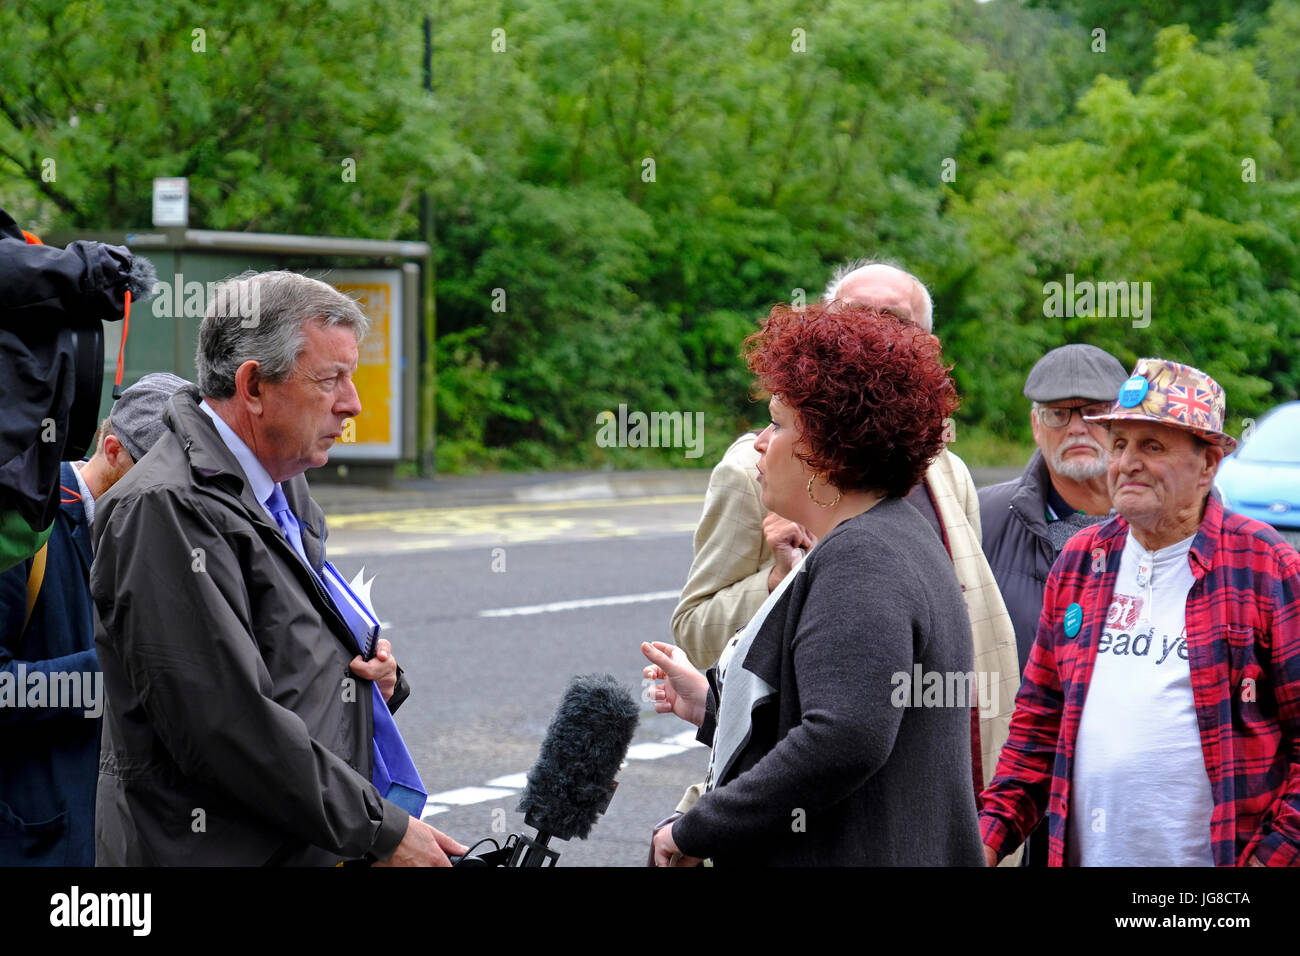 Weston-super-Mare, UK. 4th July, 2017. BBC reporter Clinton Rogers interviews demonstrators protesting against the overnight closure of the accident and emergency department at Weston General Hospital. Despite assurances that the closure is only a temporary measure, many people in the area are concerned that it is the prelude to further cuts. Keith Ramsey/Alamy Live News Stock Photo